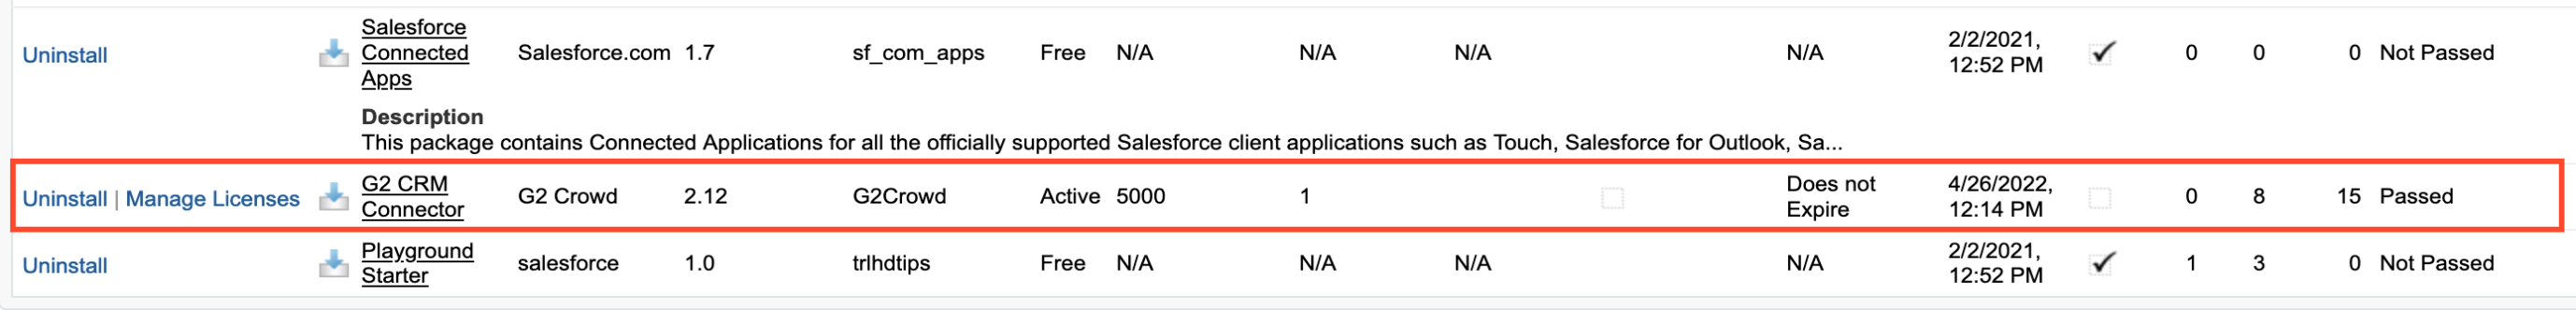 Review the Salesforce installed package details